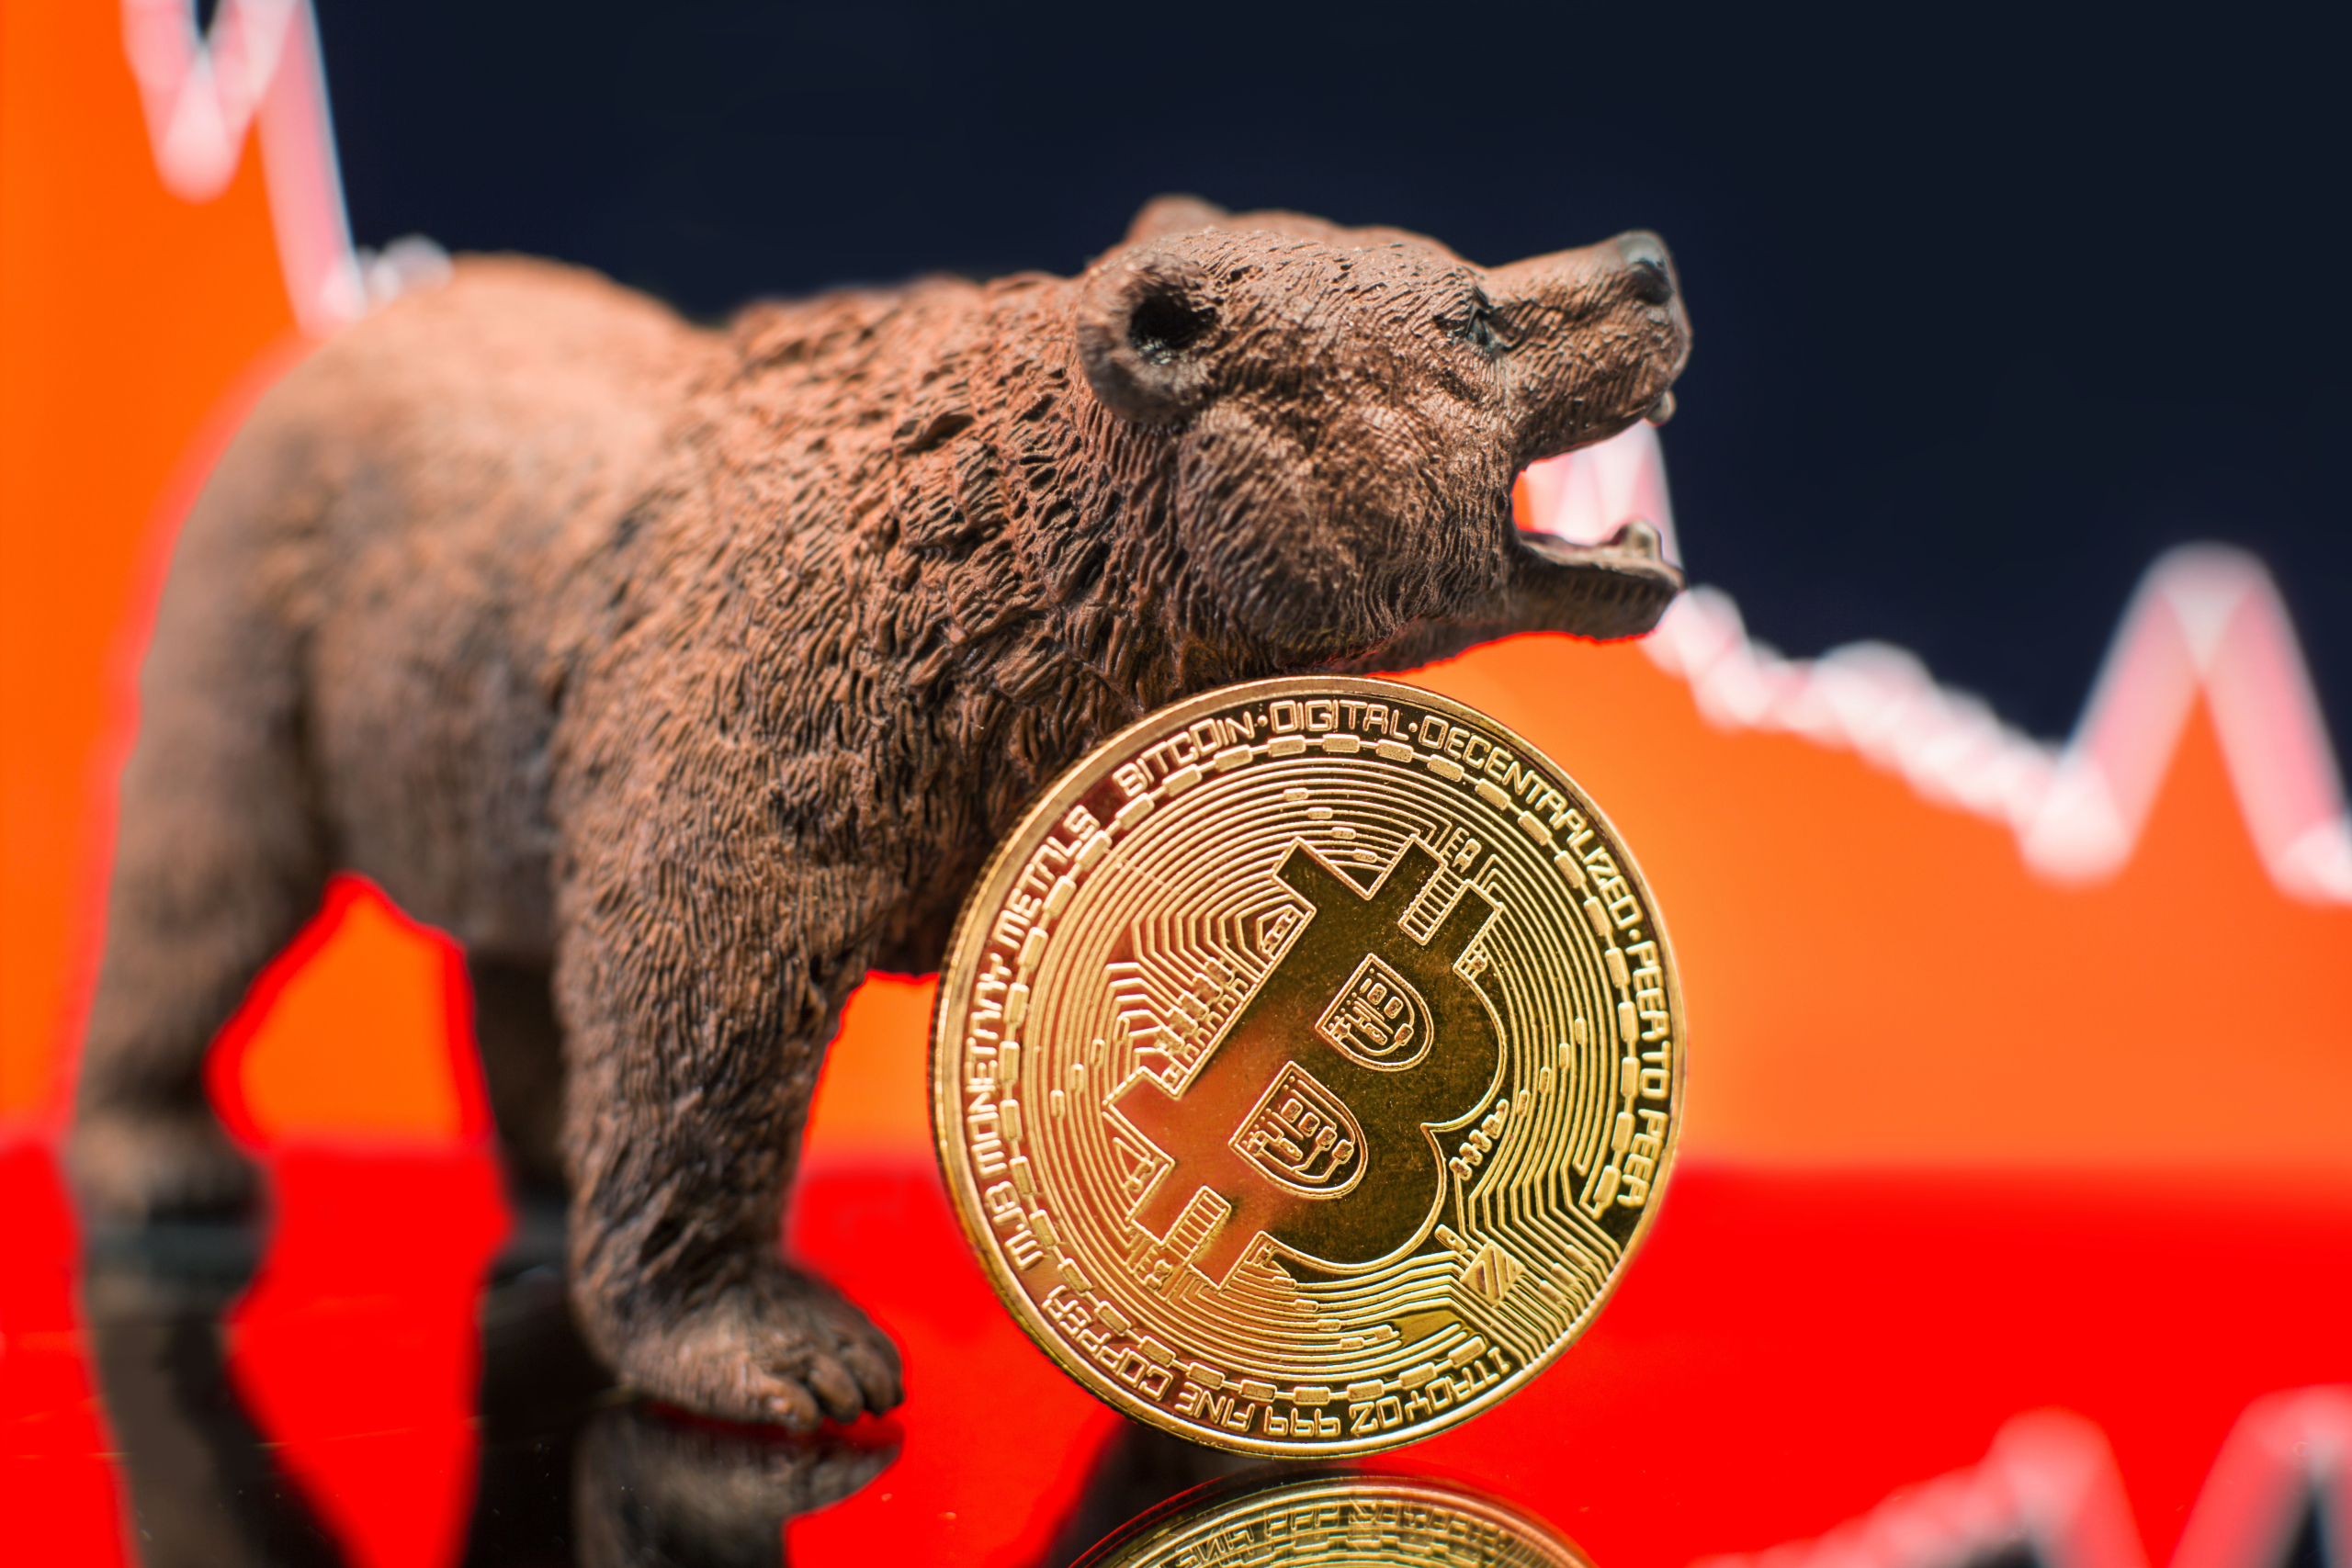 Bitcoin trading volume plummets, what's going on?
